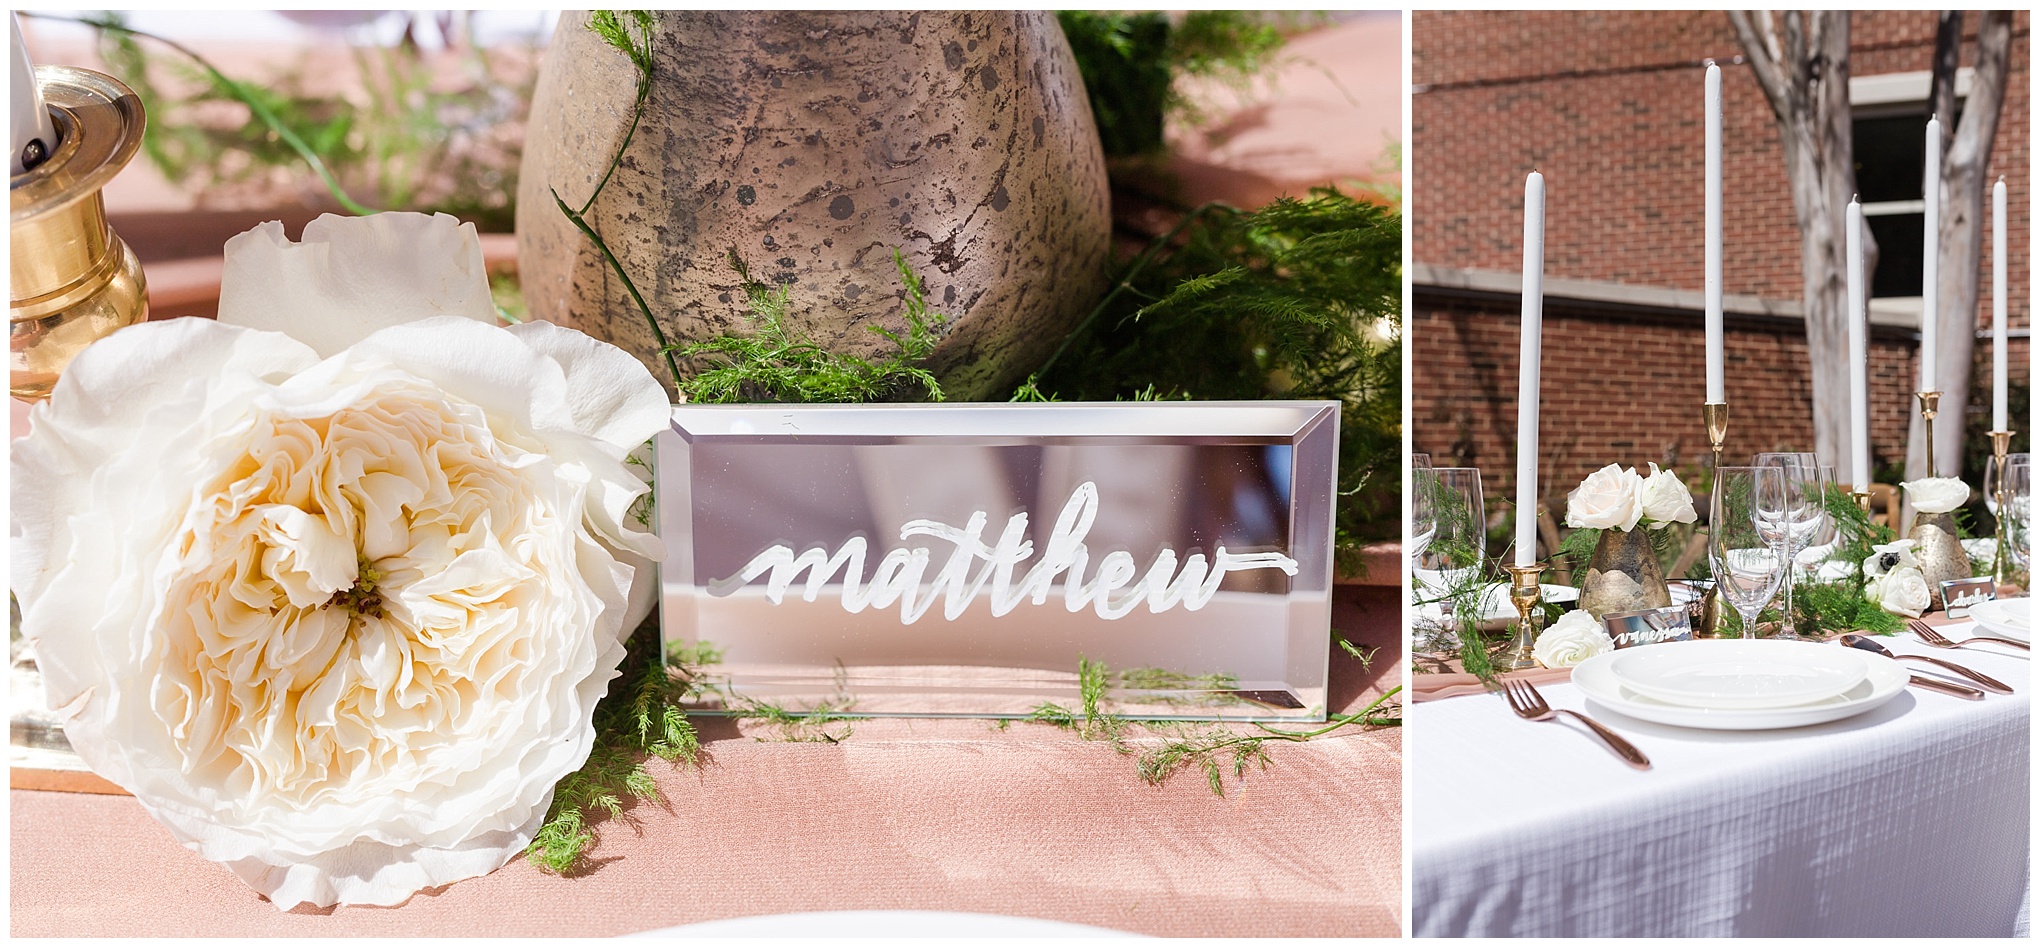 modern minimalist wedding inspiration, calligraphy, mirrored name tags, tablescape, greenery, styled shoot, Alexandria, northern Virginia, modern wedding, minimalist wedding inspiration, minimalist wedding, tapered candles, hotel wedding